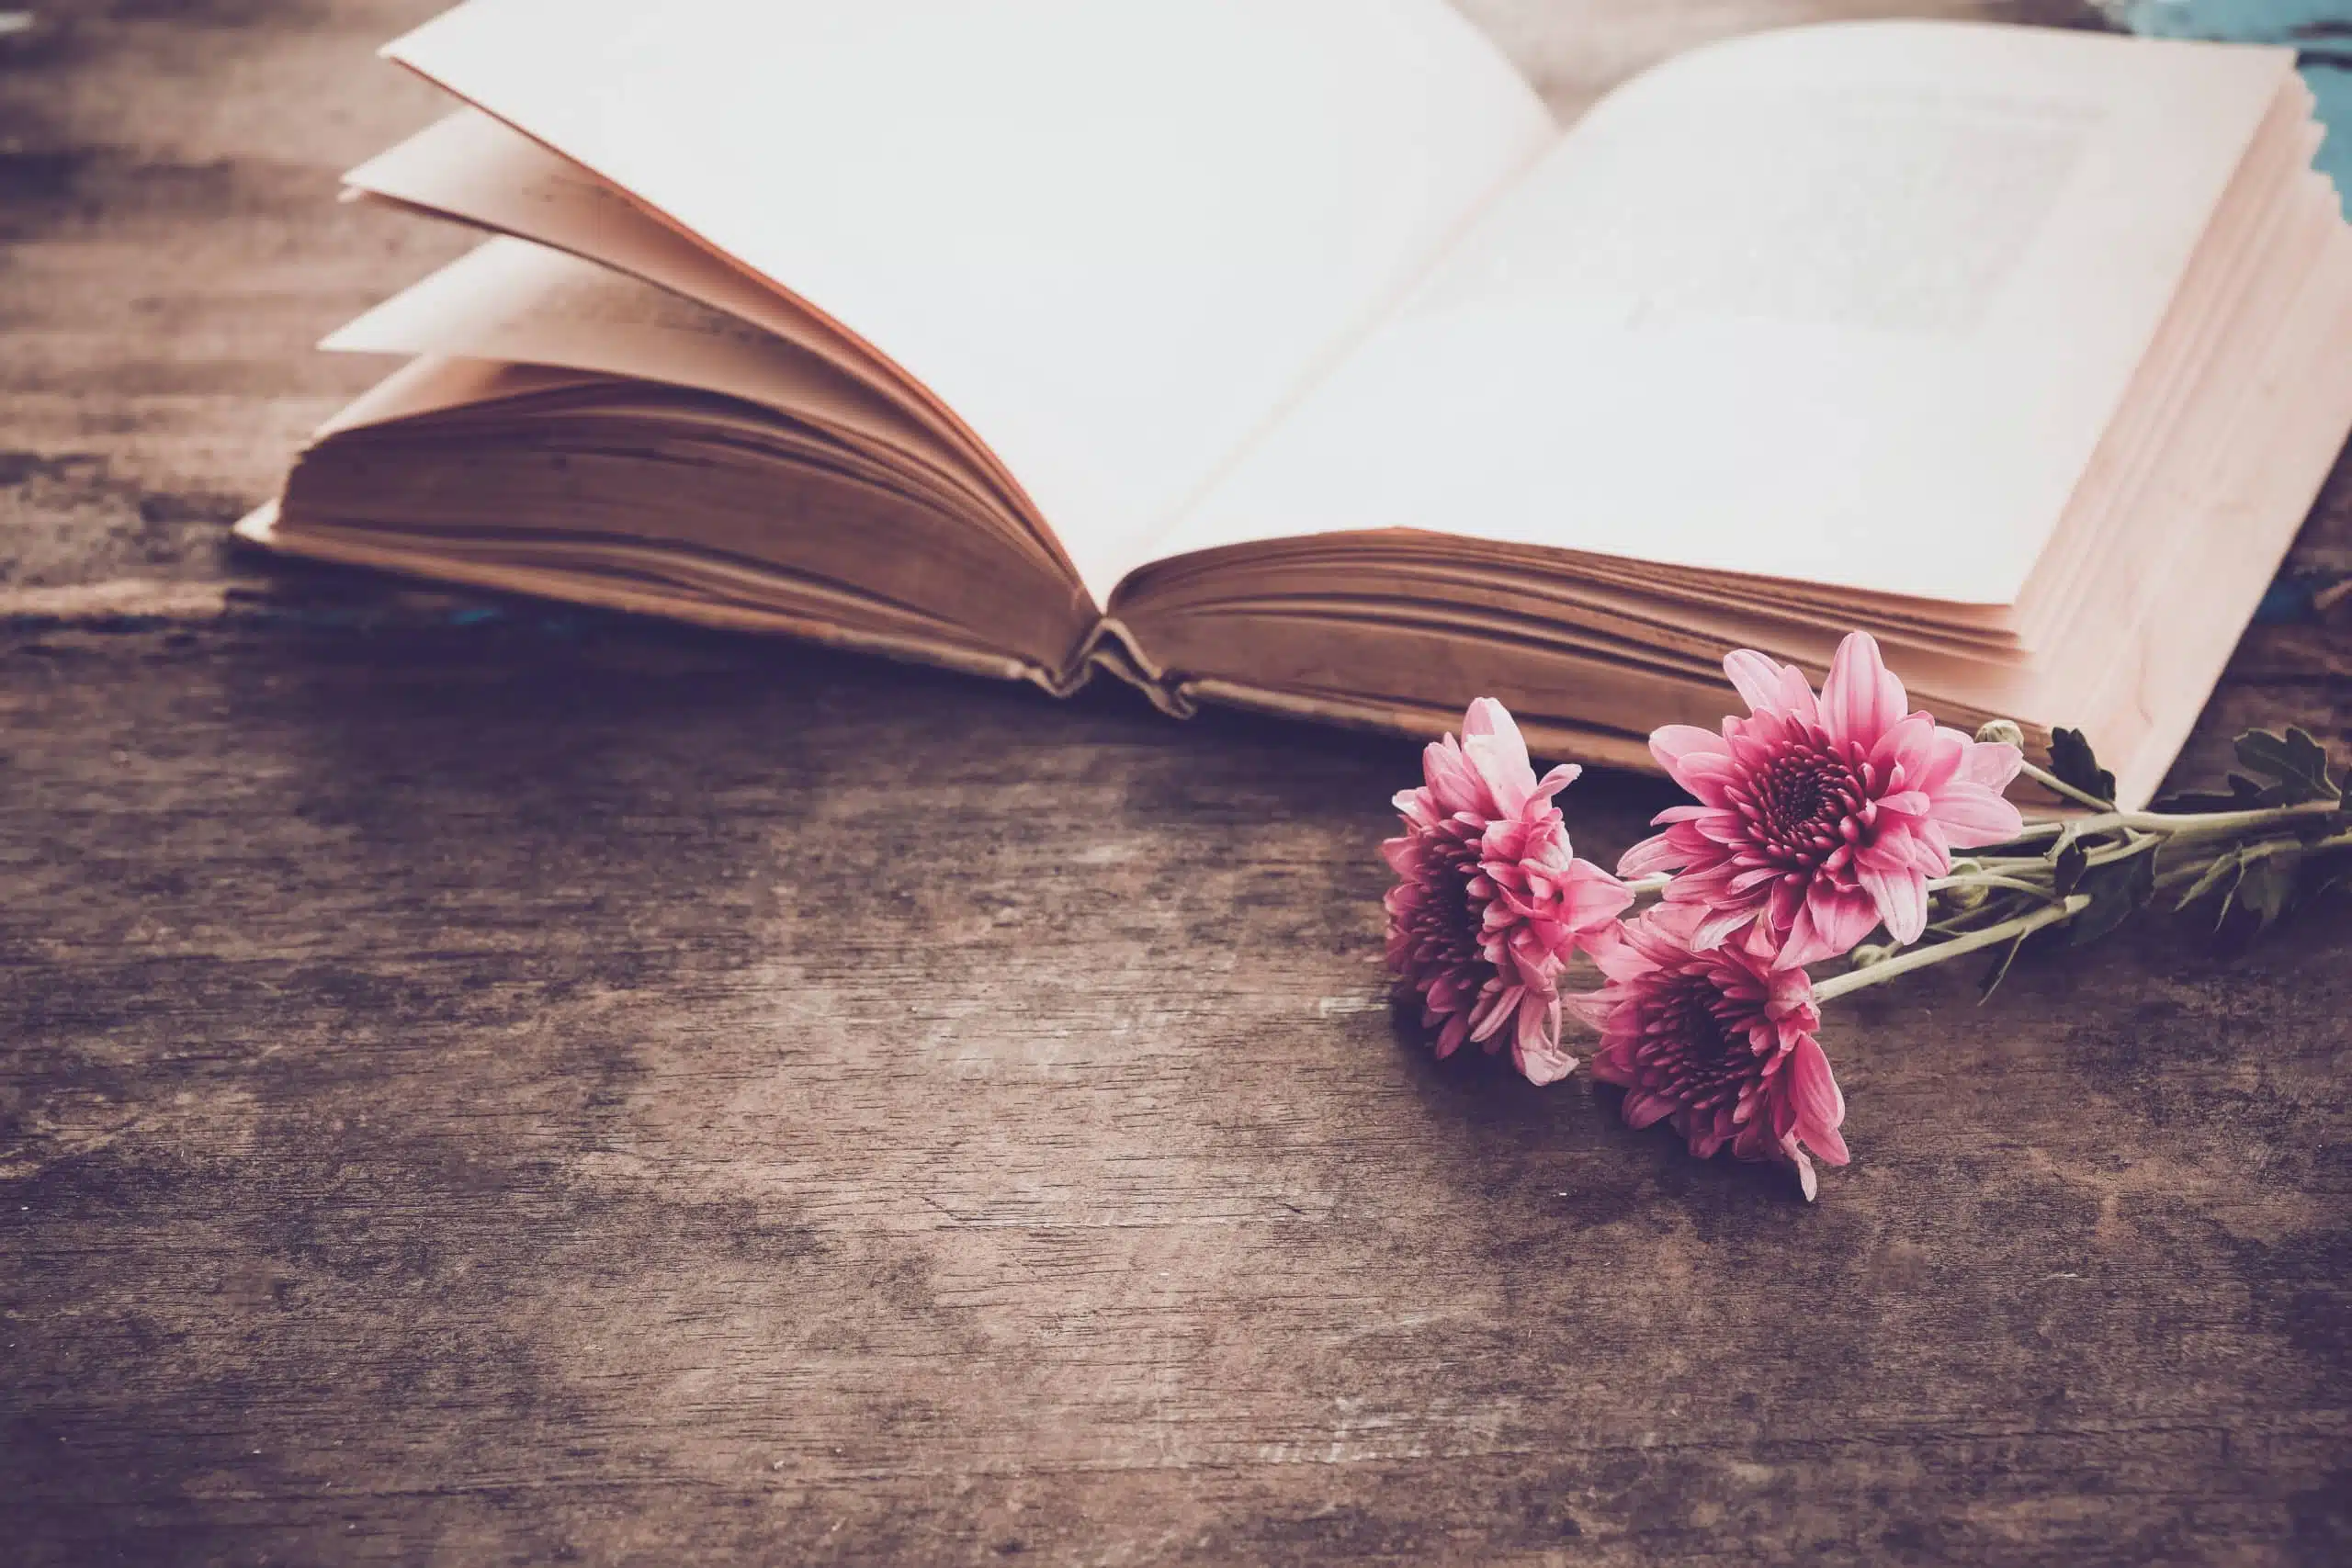 Book and flowers.